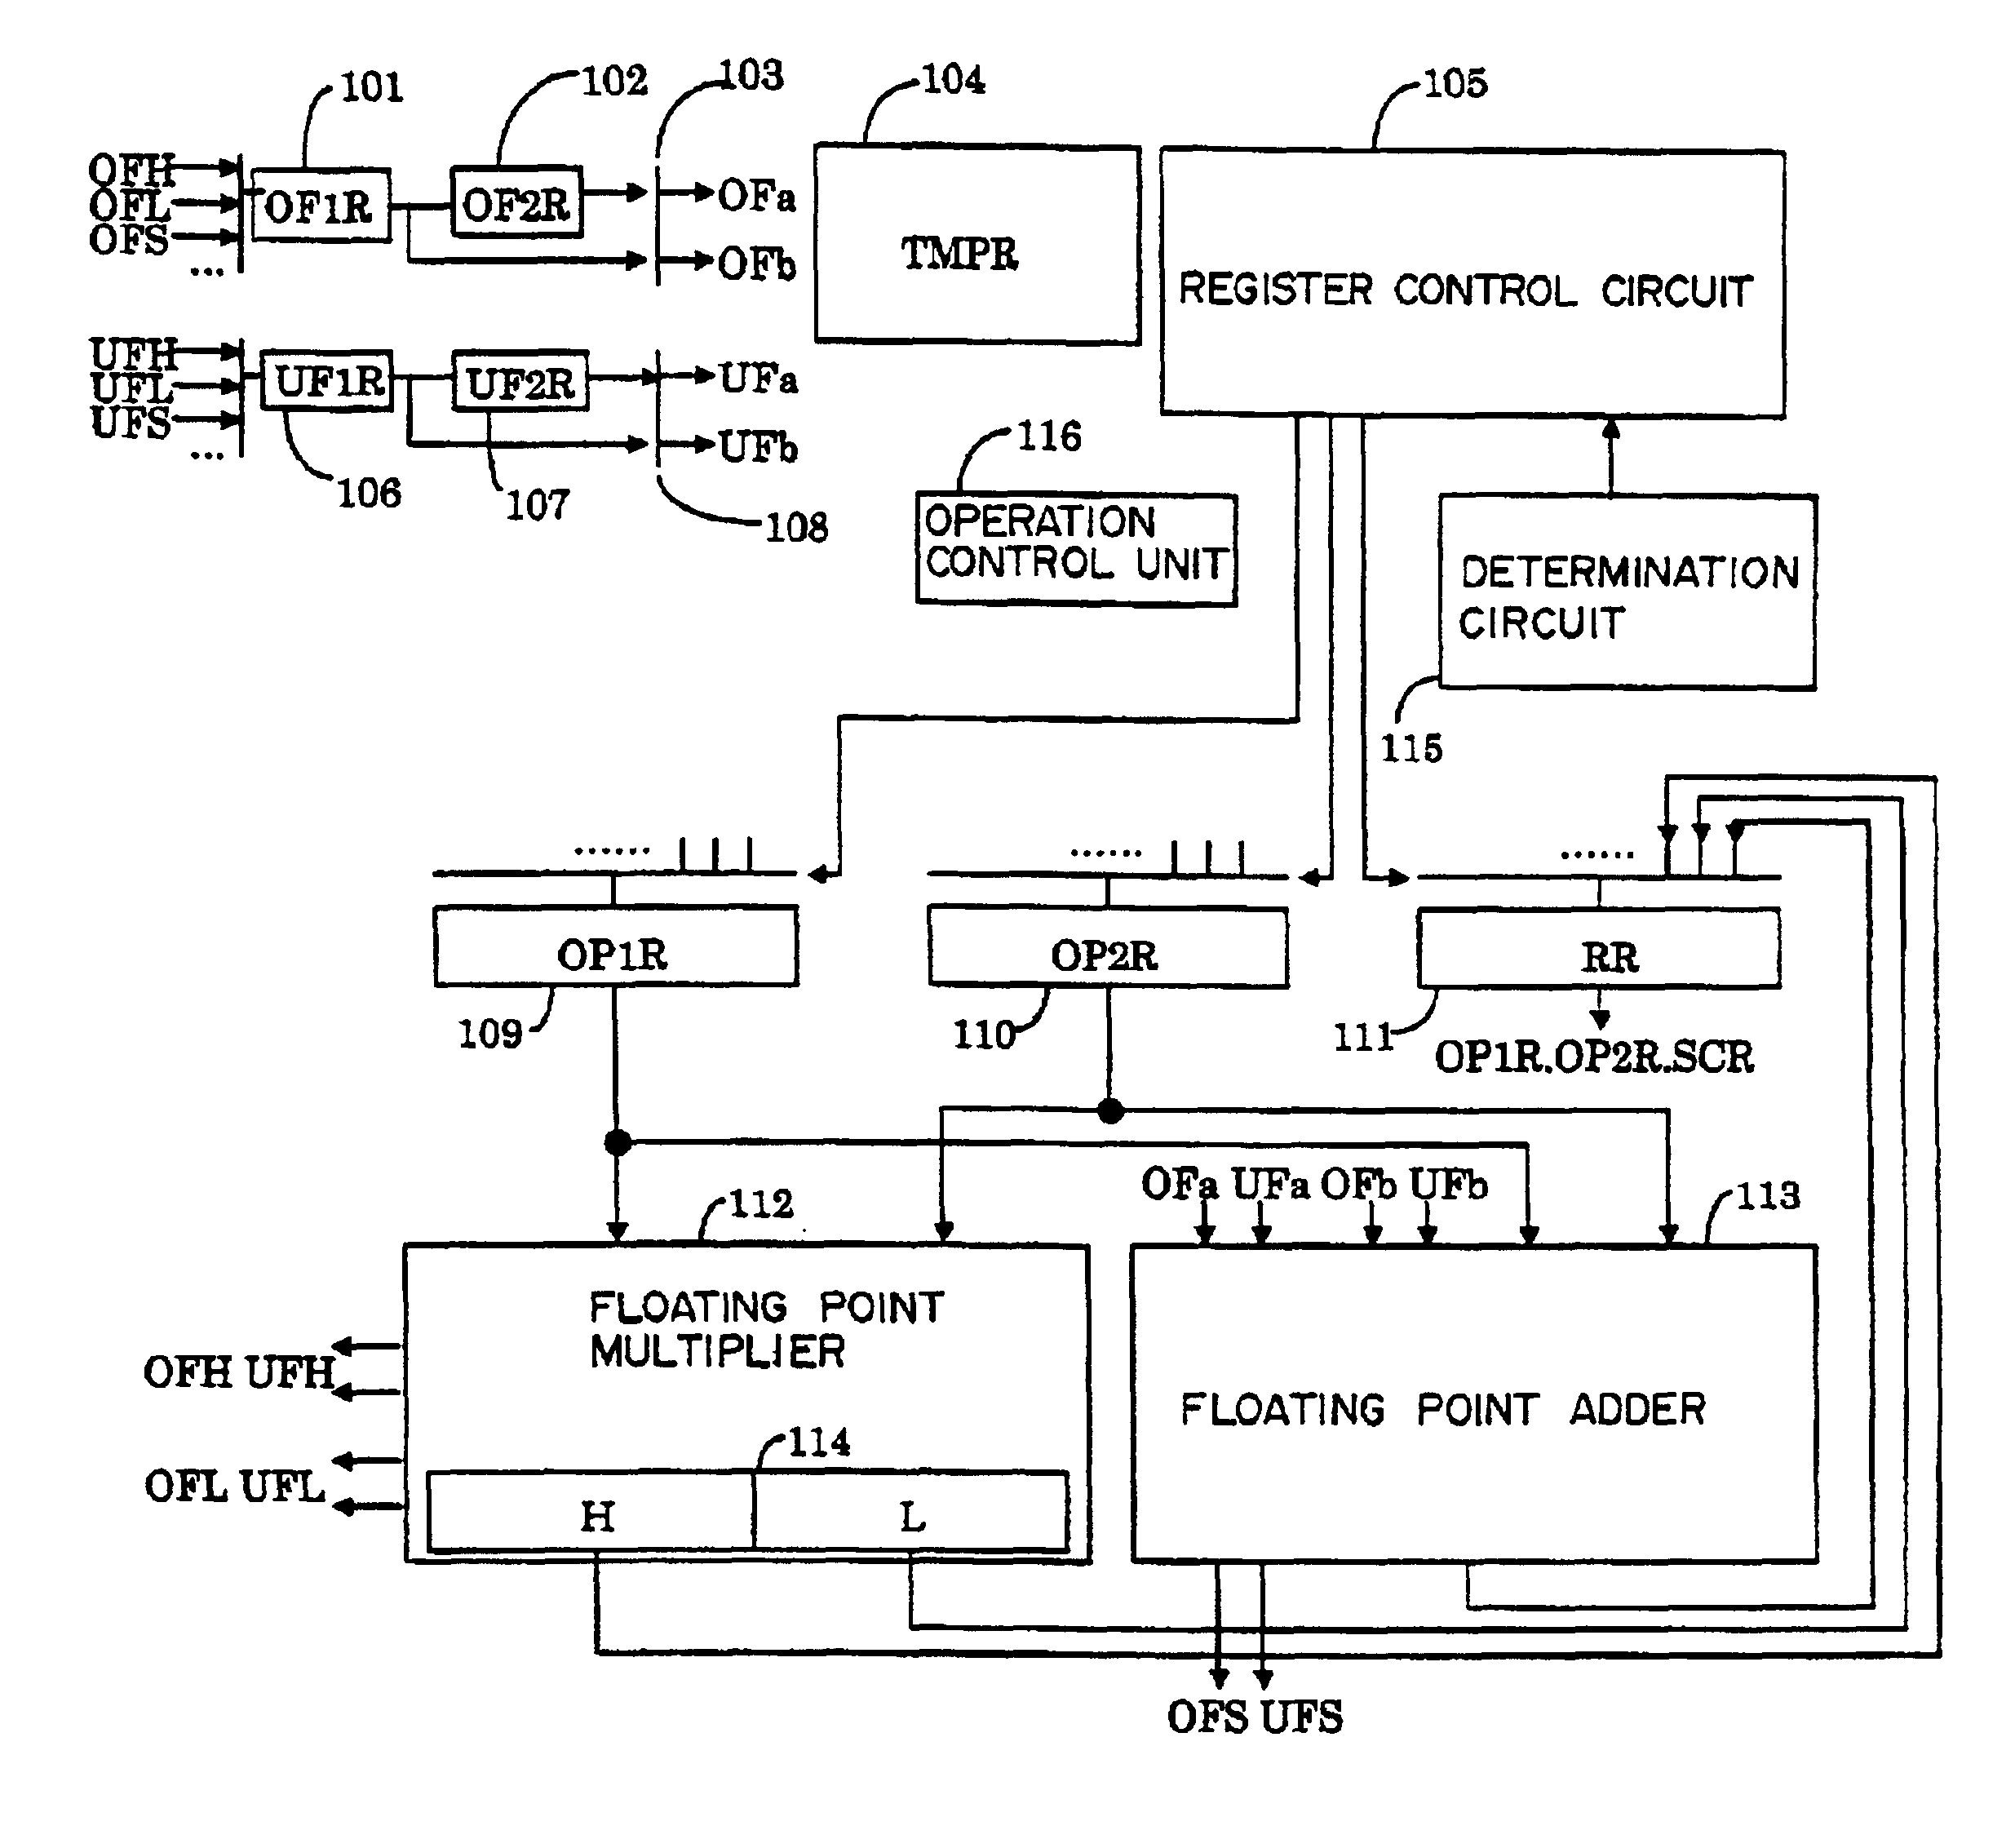 Apparatus and method of performing product-sum operation